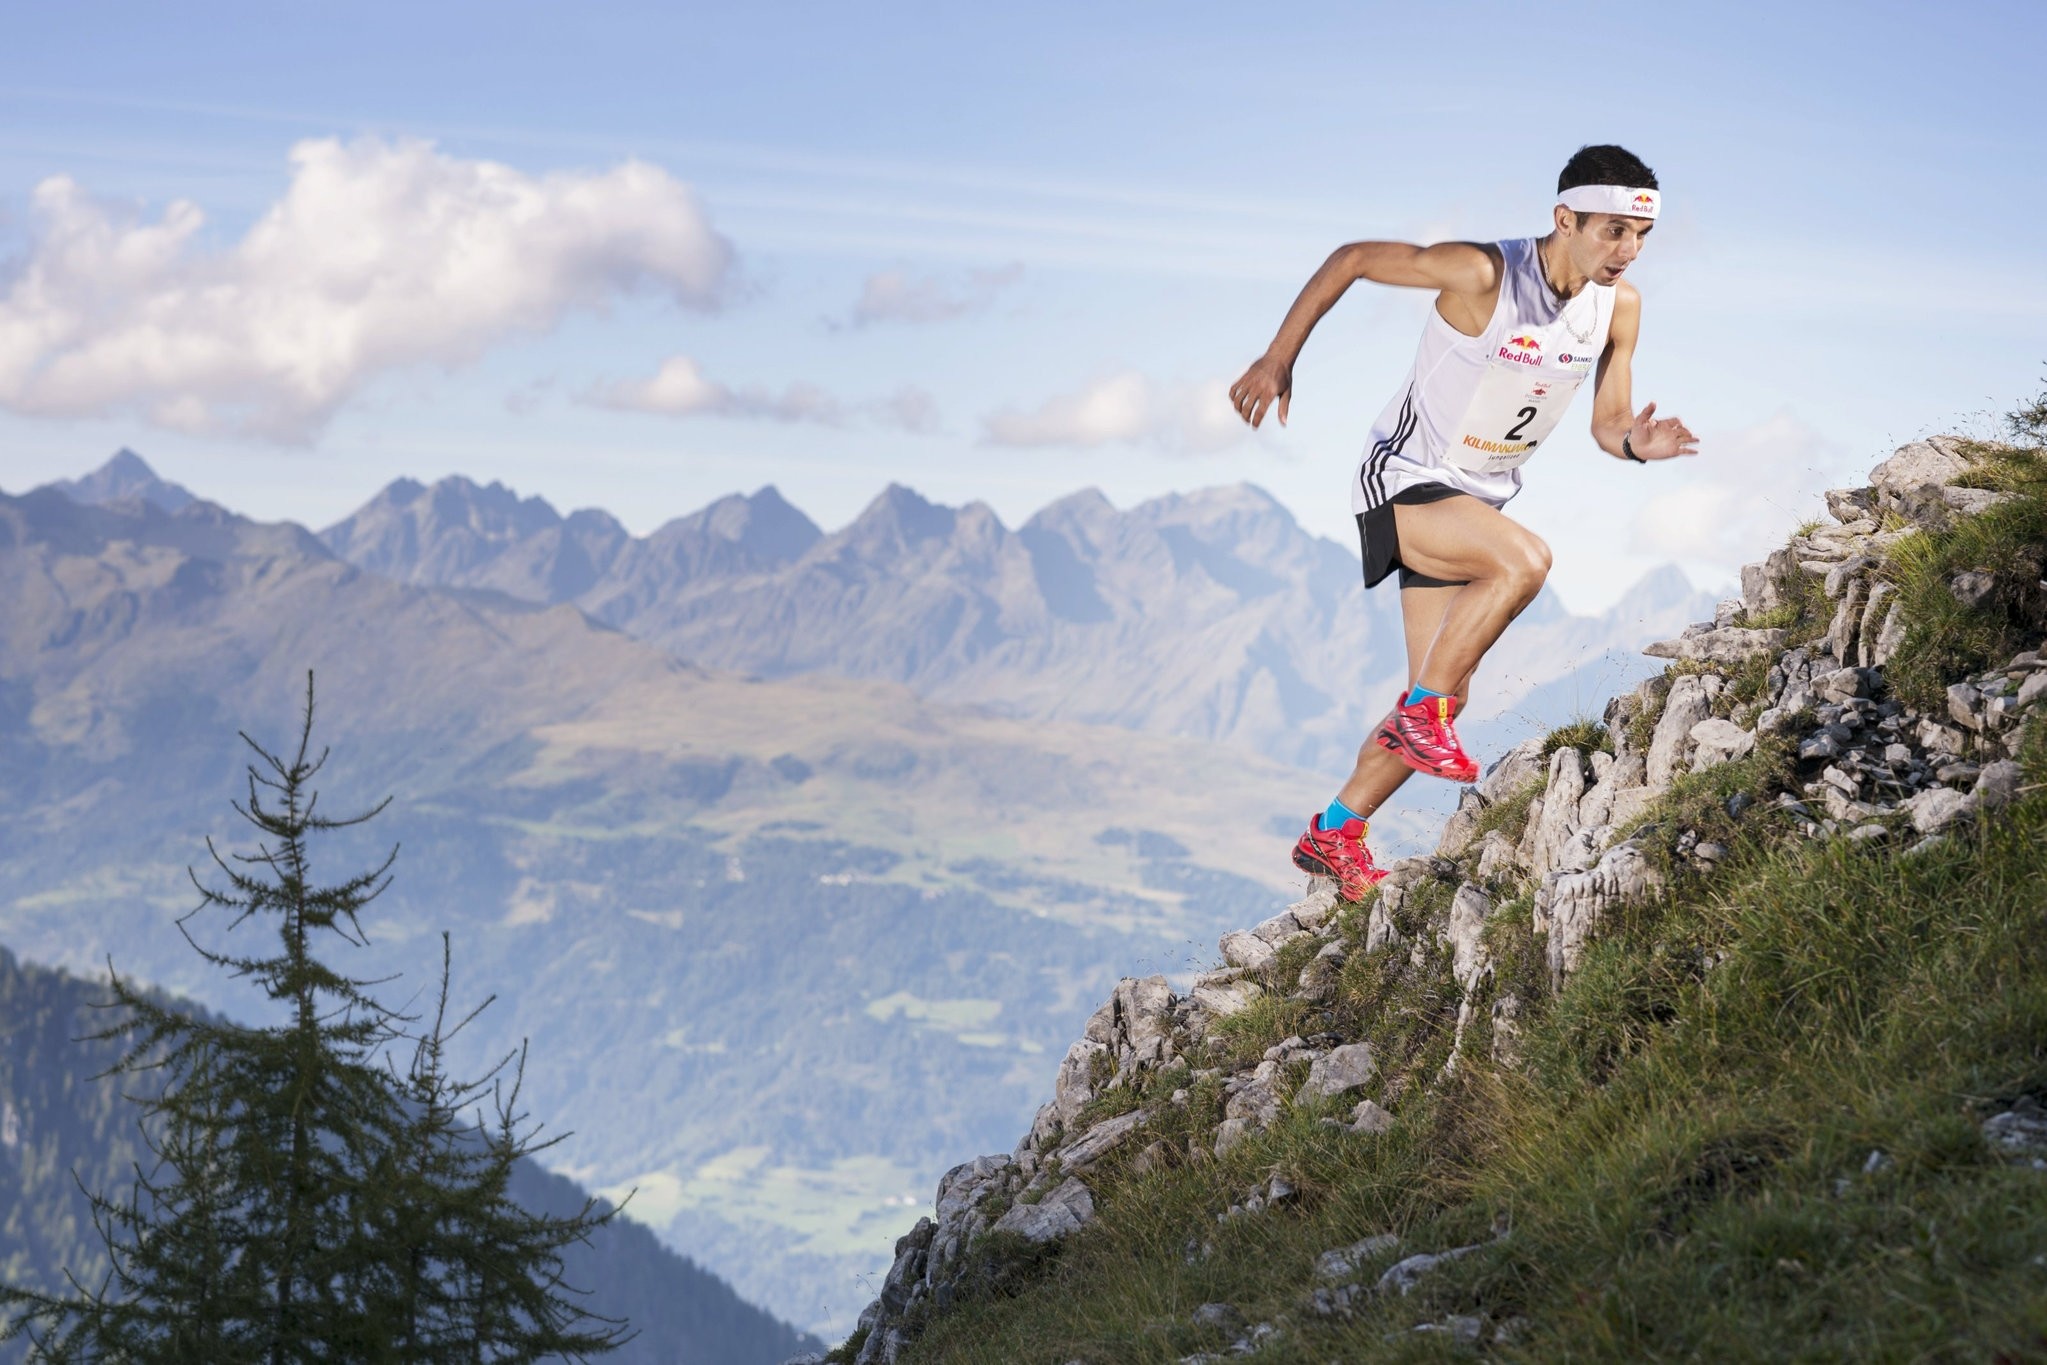 Ahmet Arslan has made history in trail running races in France, Austria, Slovenia, Bulgaria and Albania, wining nearly 60 medals in 13 years.